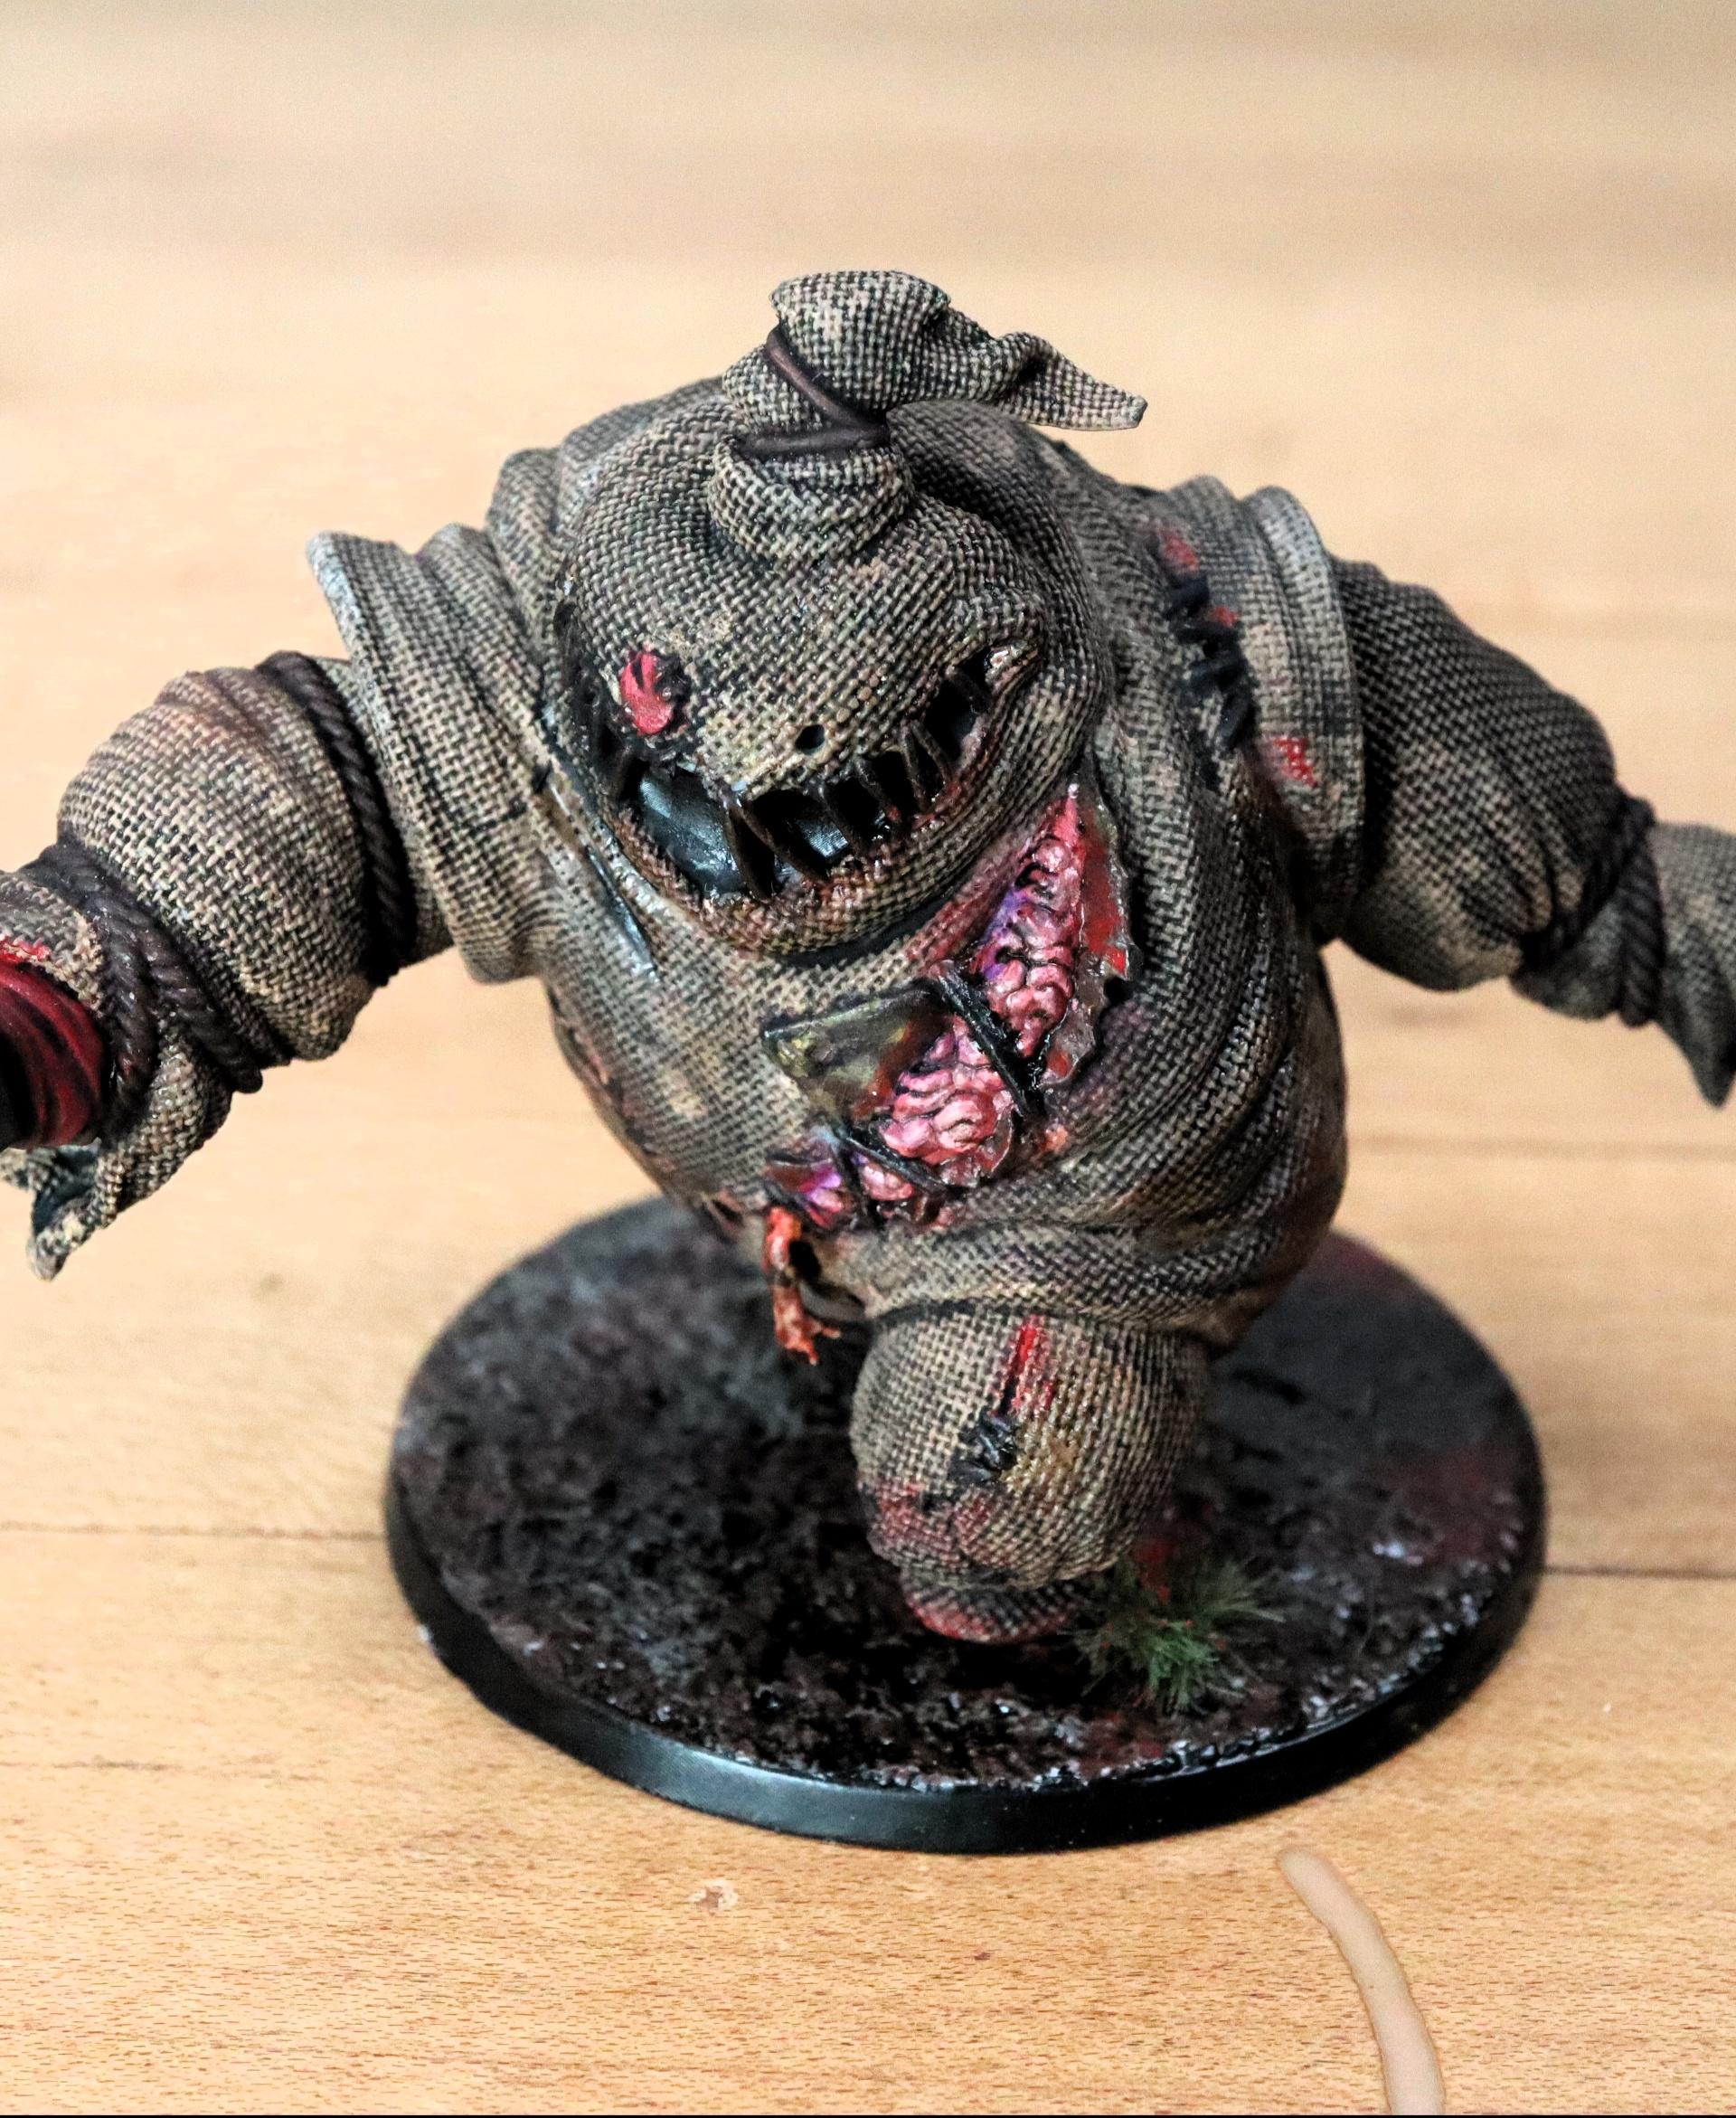 Burlap Monstrosity - Printed and Painted by Green Dragon Forge

https://www.youtube.com/shorts/CuKcHqlGTrI
 - 3d model